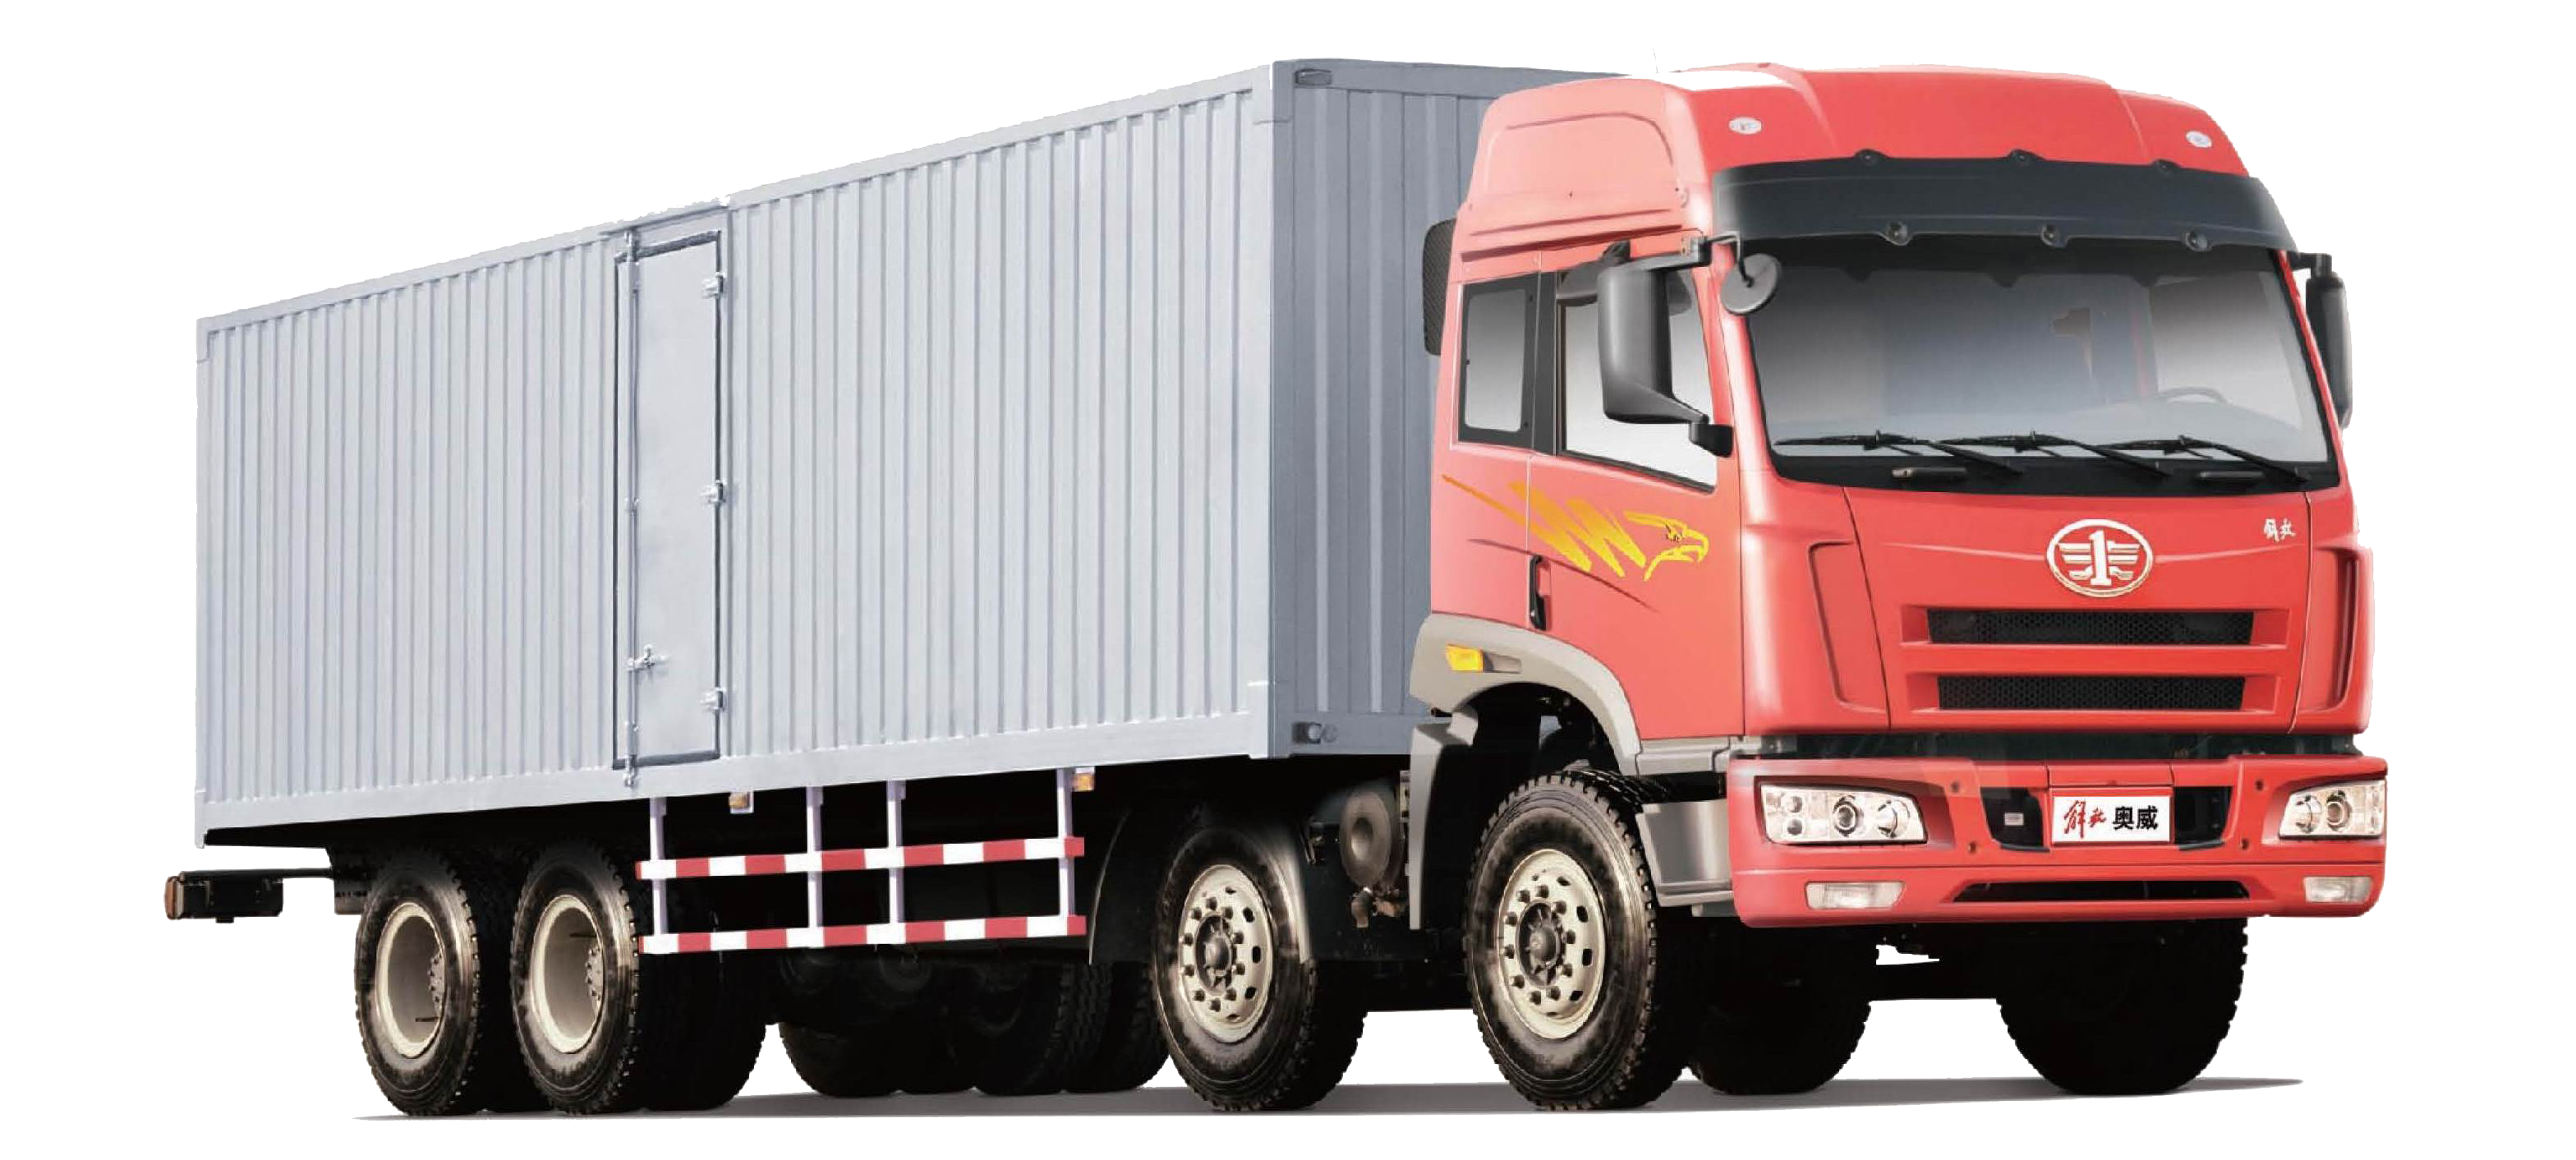 Cargo Truck Png - Cargo Container Trucks, Transparent background PNG HD thumbnail